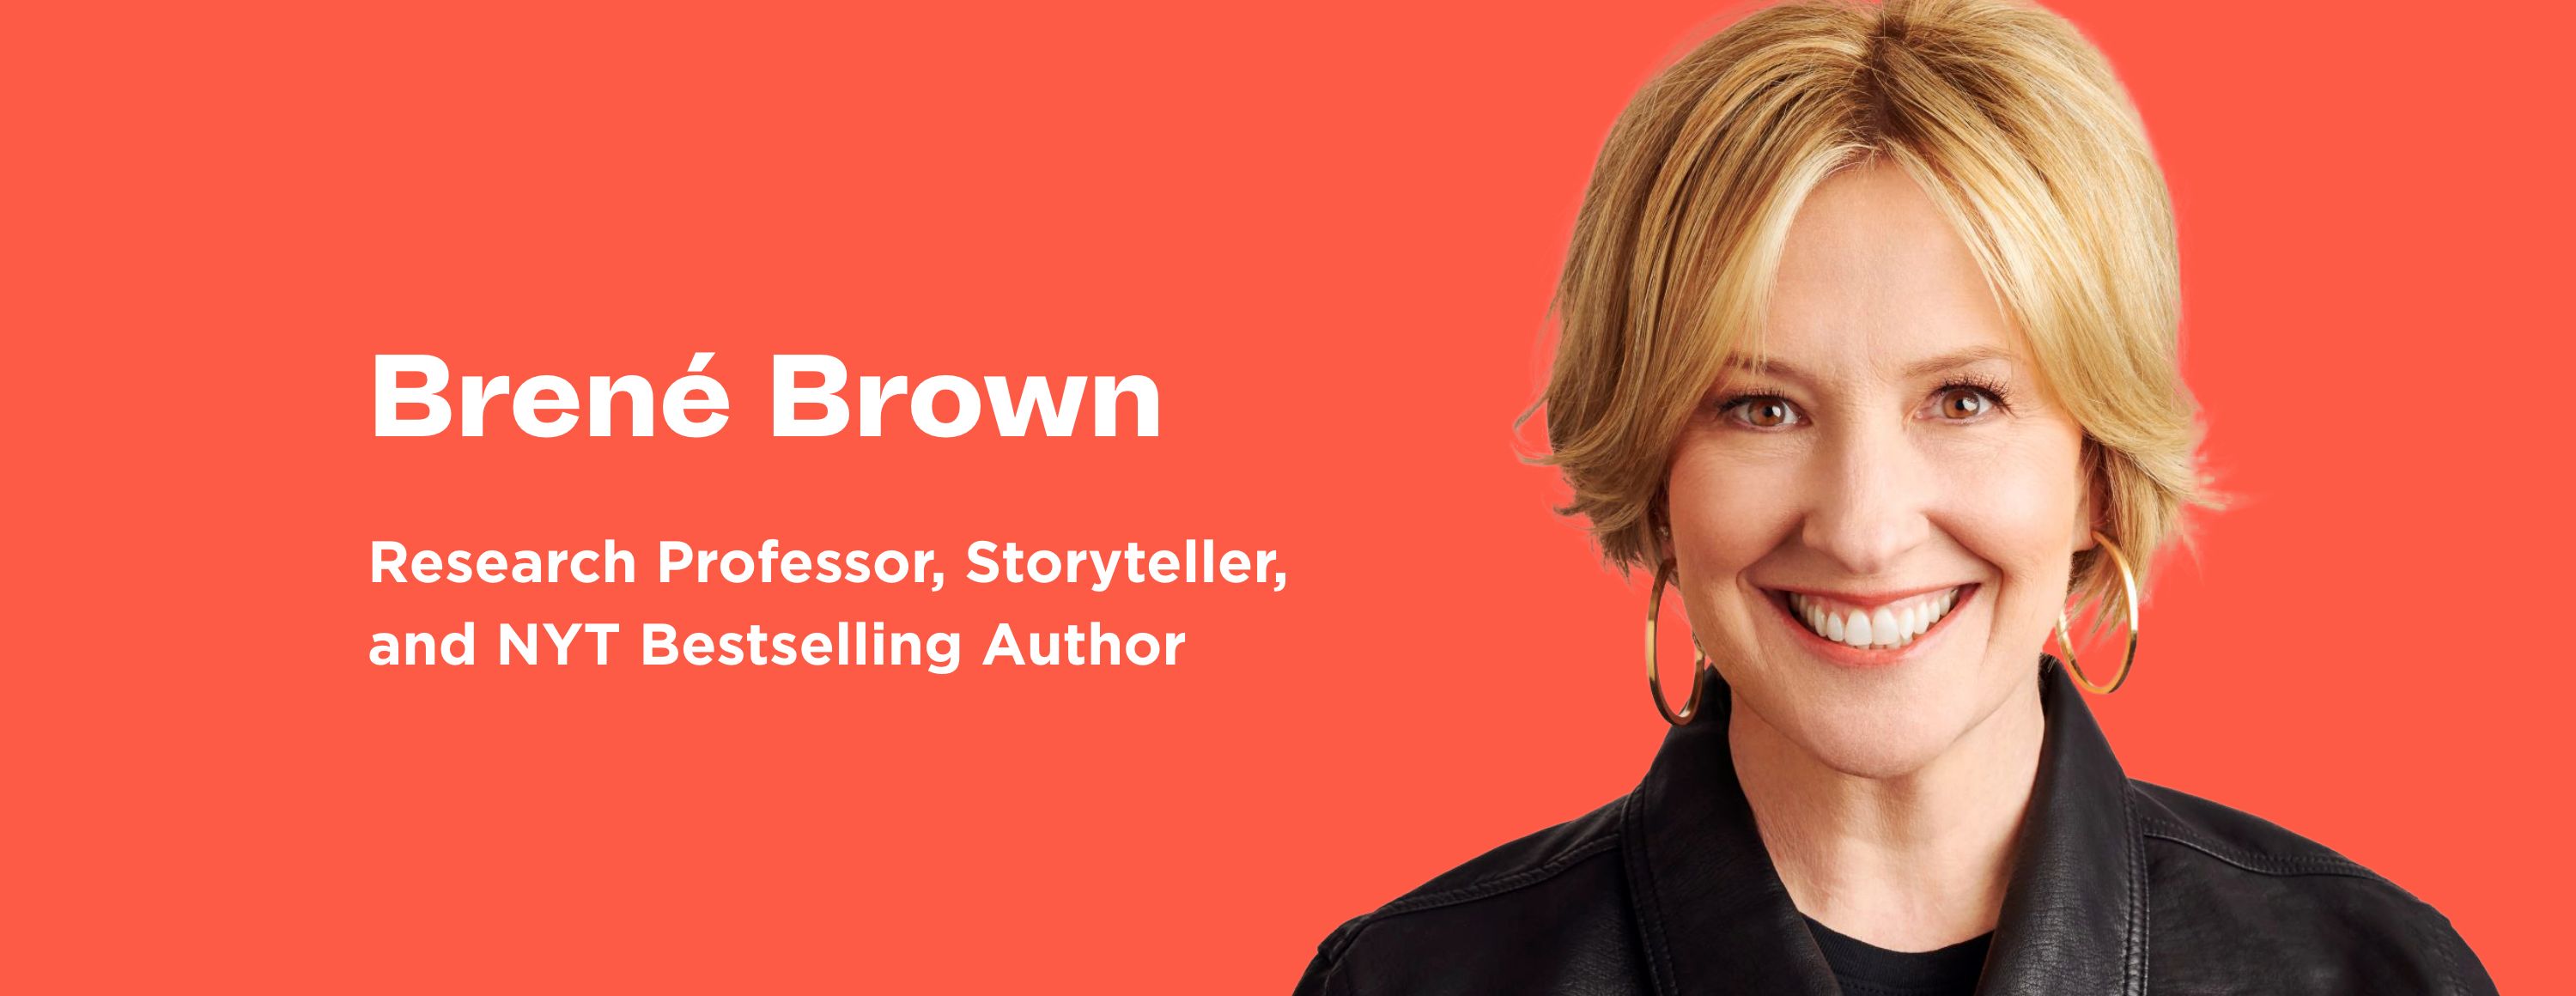 Brené Brown: Research Professor, Storyteller, and NYT Bestselling Author